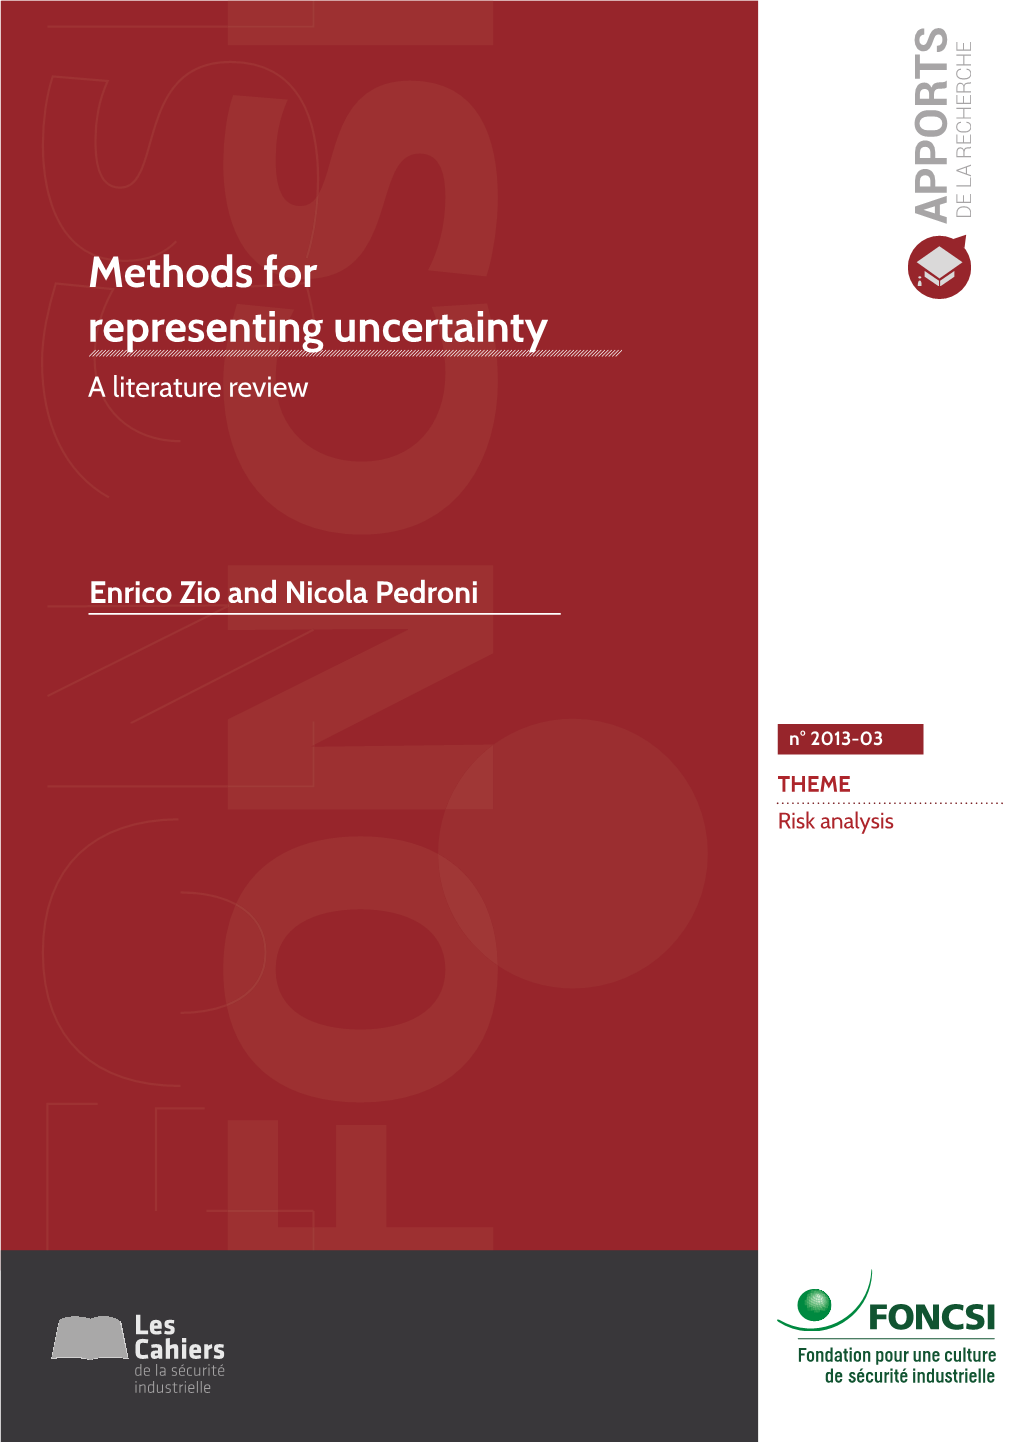 Literature Review of Methods for Representing Uncertainty